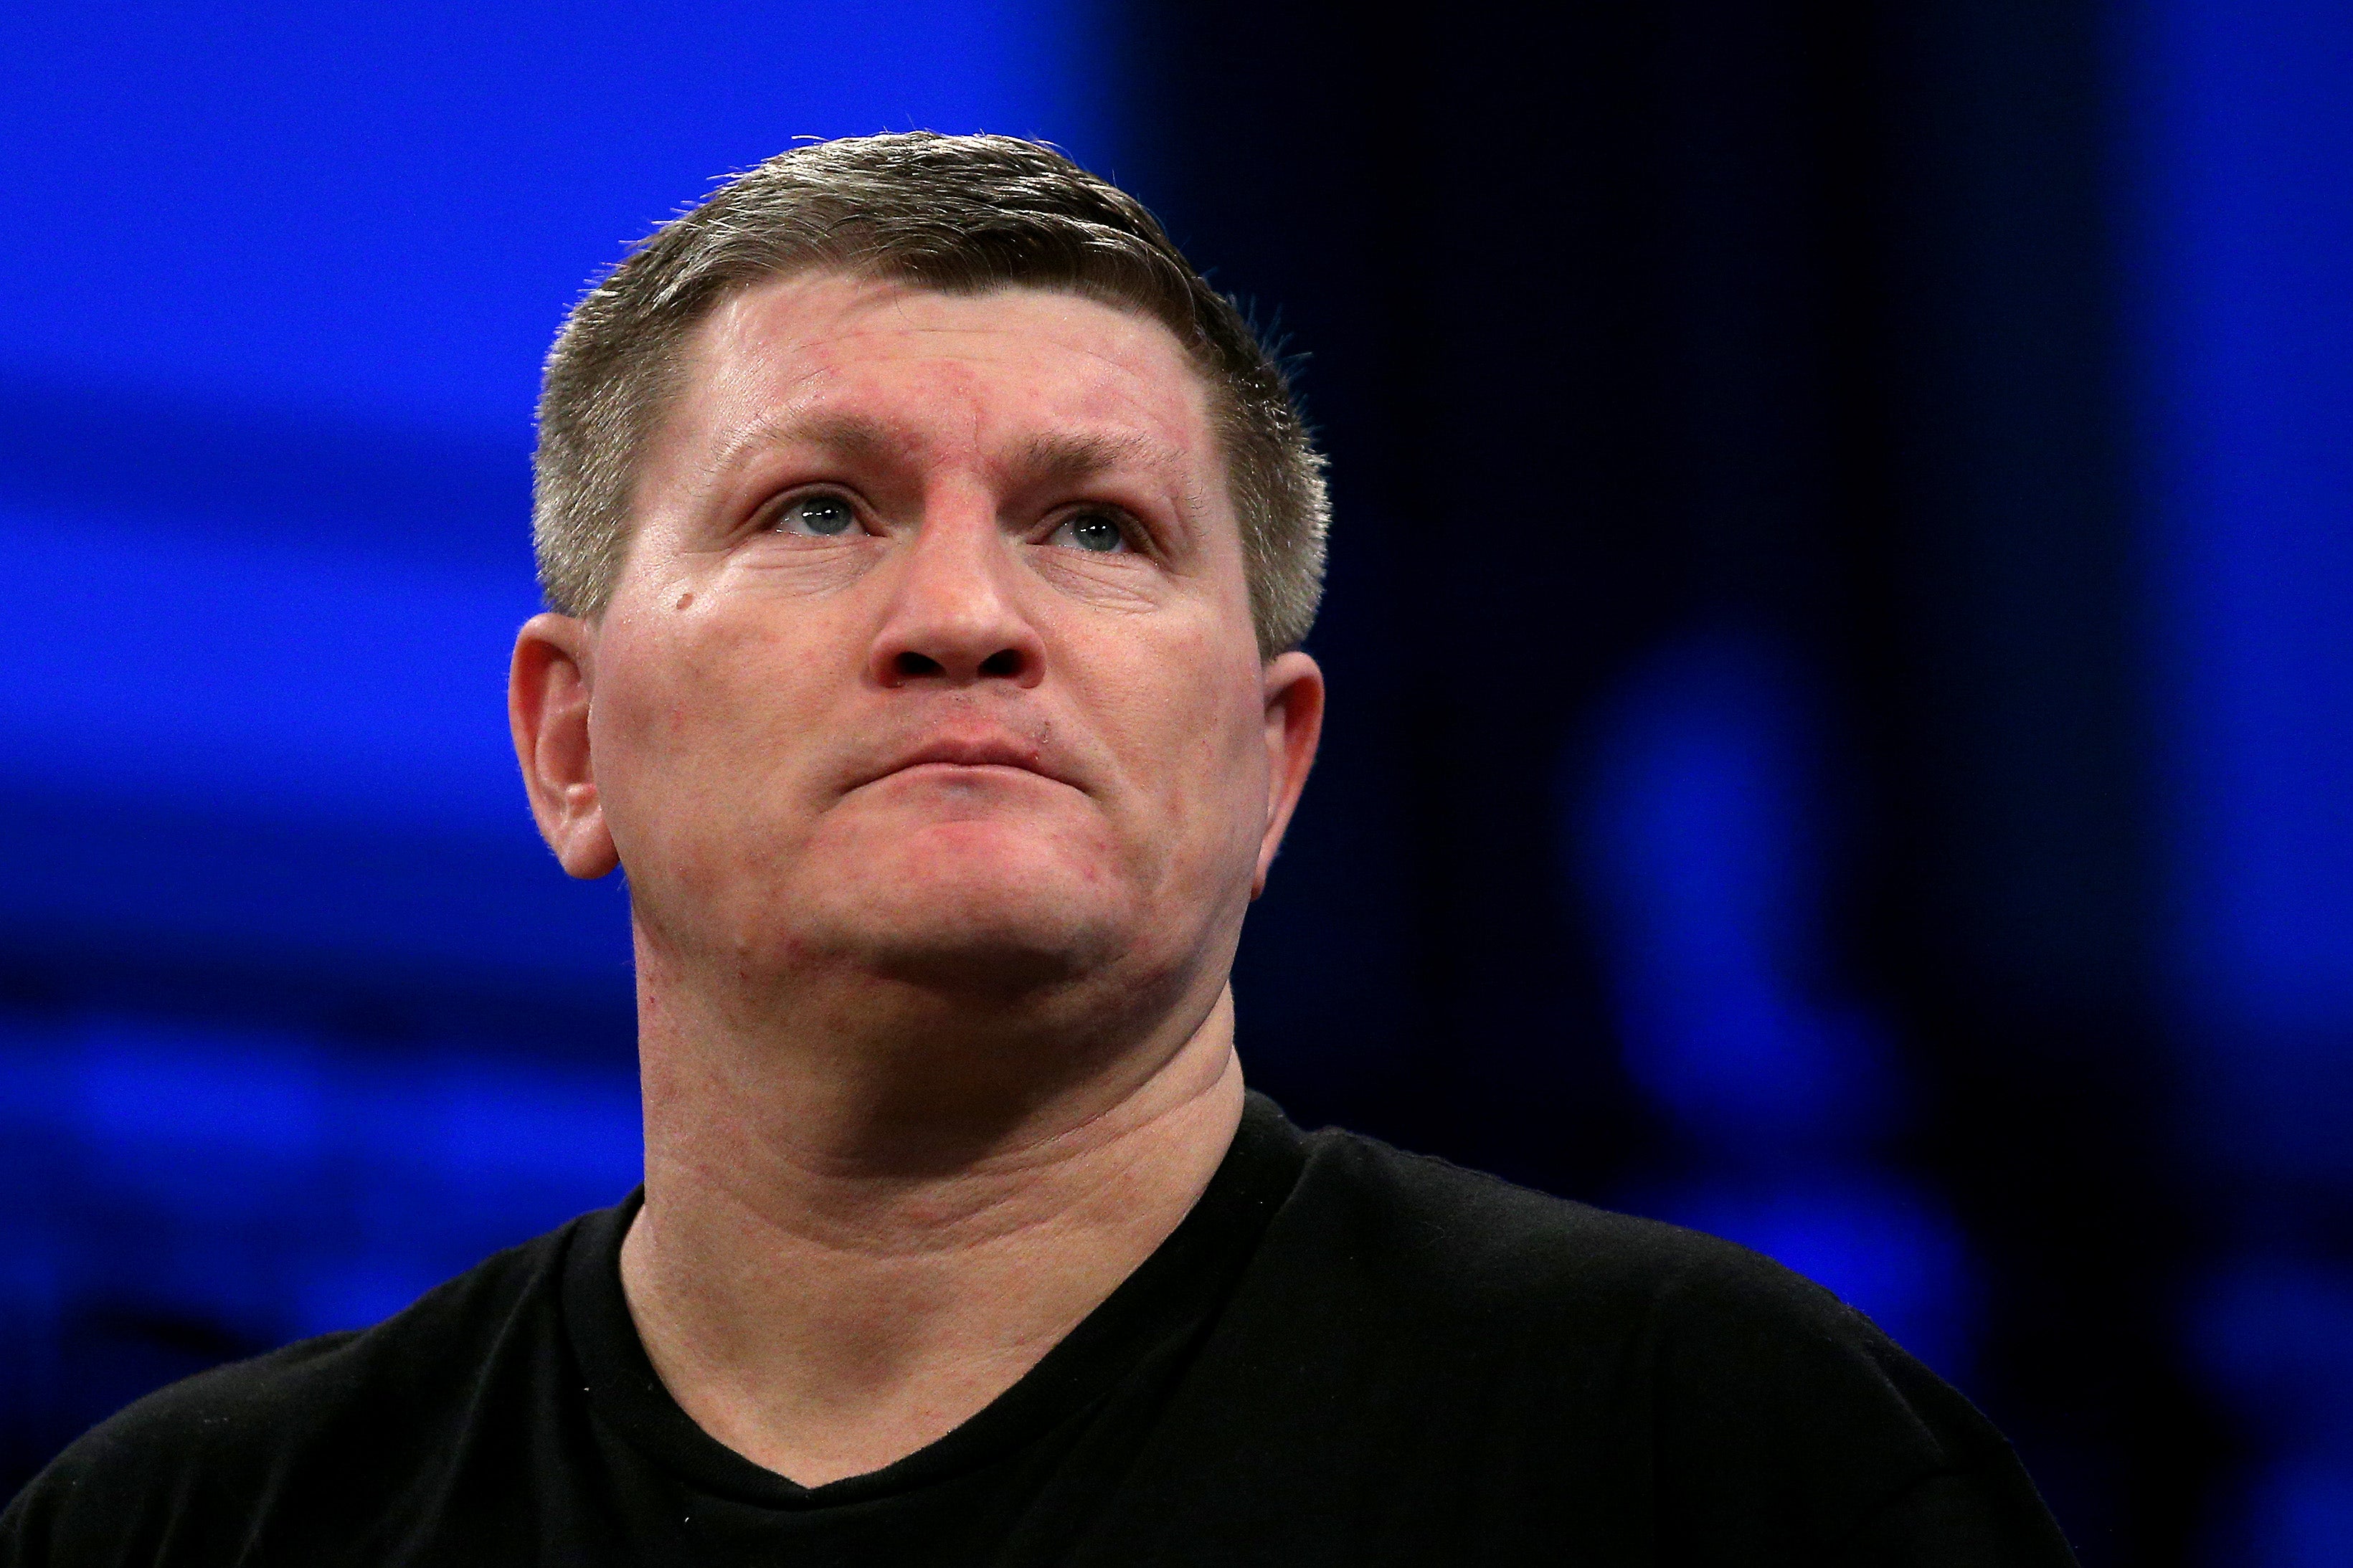 Ricky Hatton returns to the ring in an exhibition against Marco Antonio Barrera